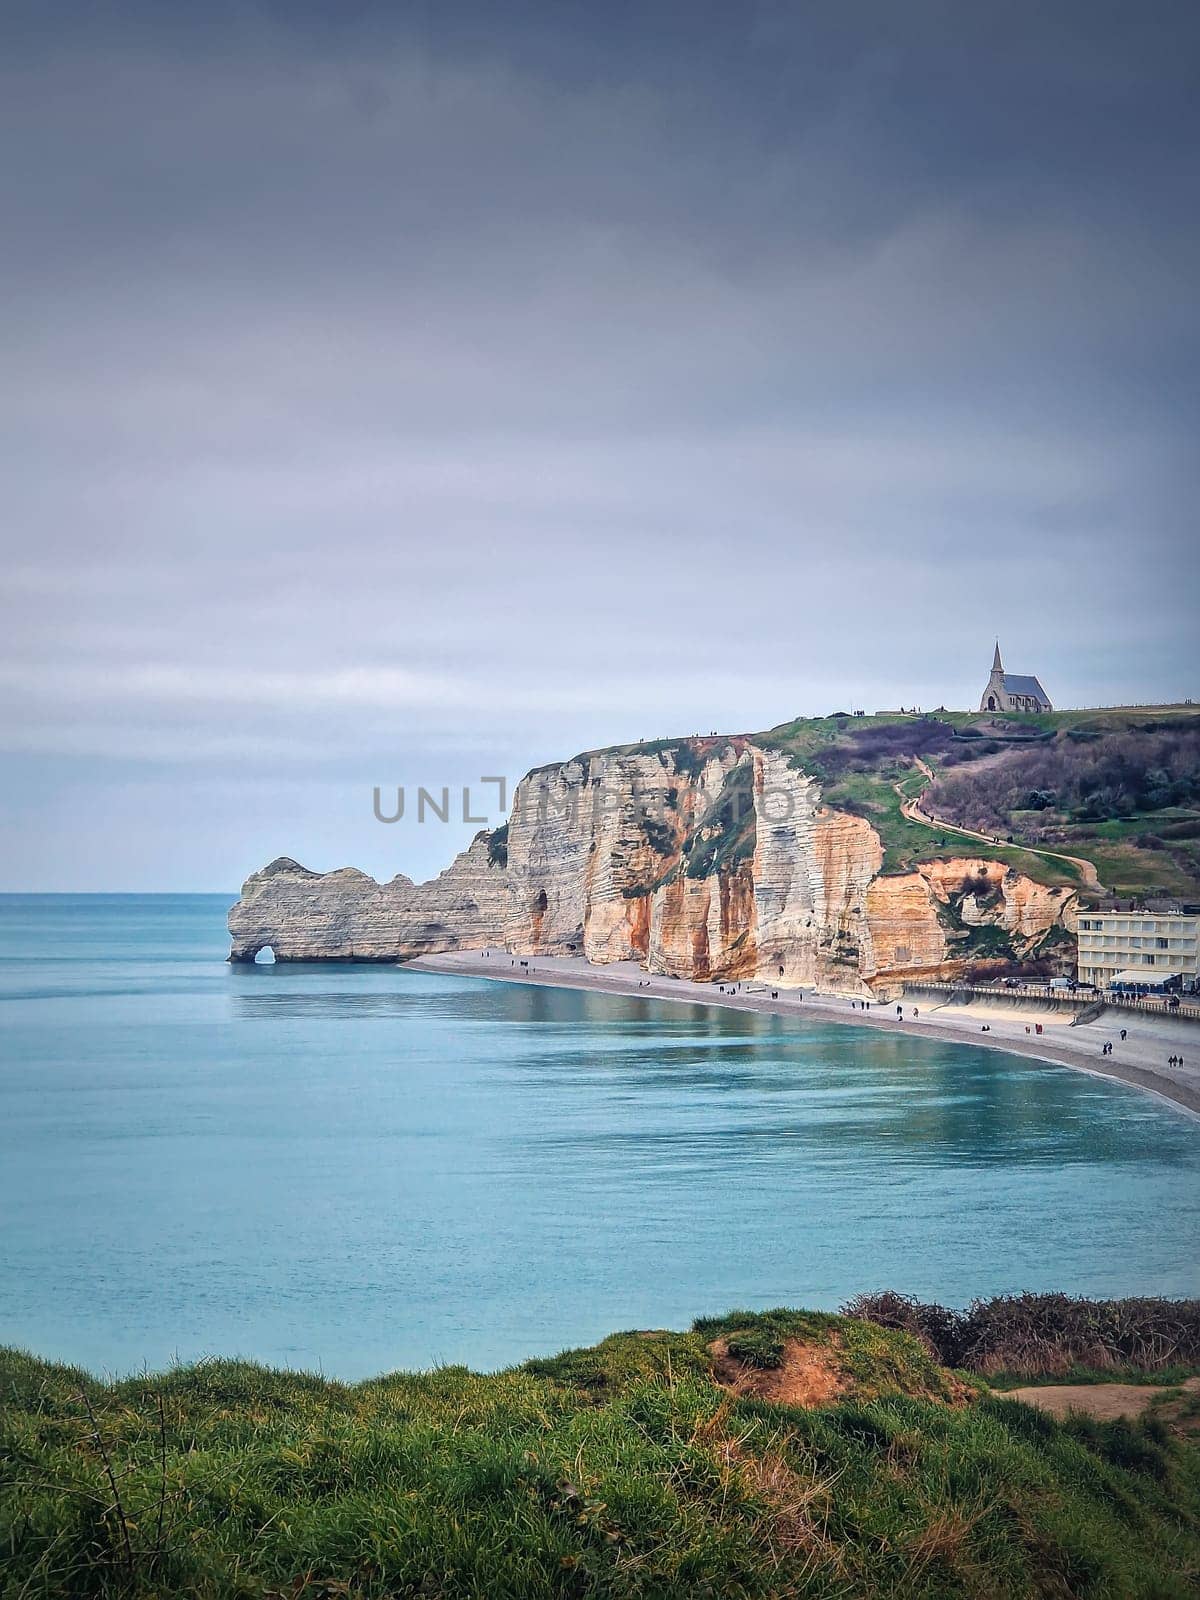 Idyllic view to Etretat coastline with the famous Notre-Dame de la Garde chapel on the Amont cliff. Shore washed by Atlantic ocean waters, Normandy, France by psychoshadow